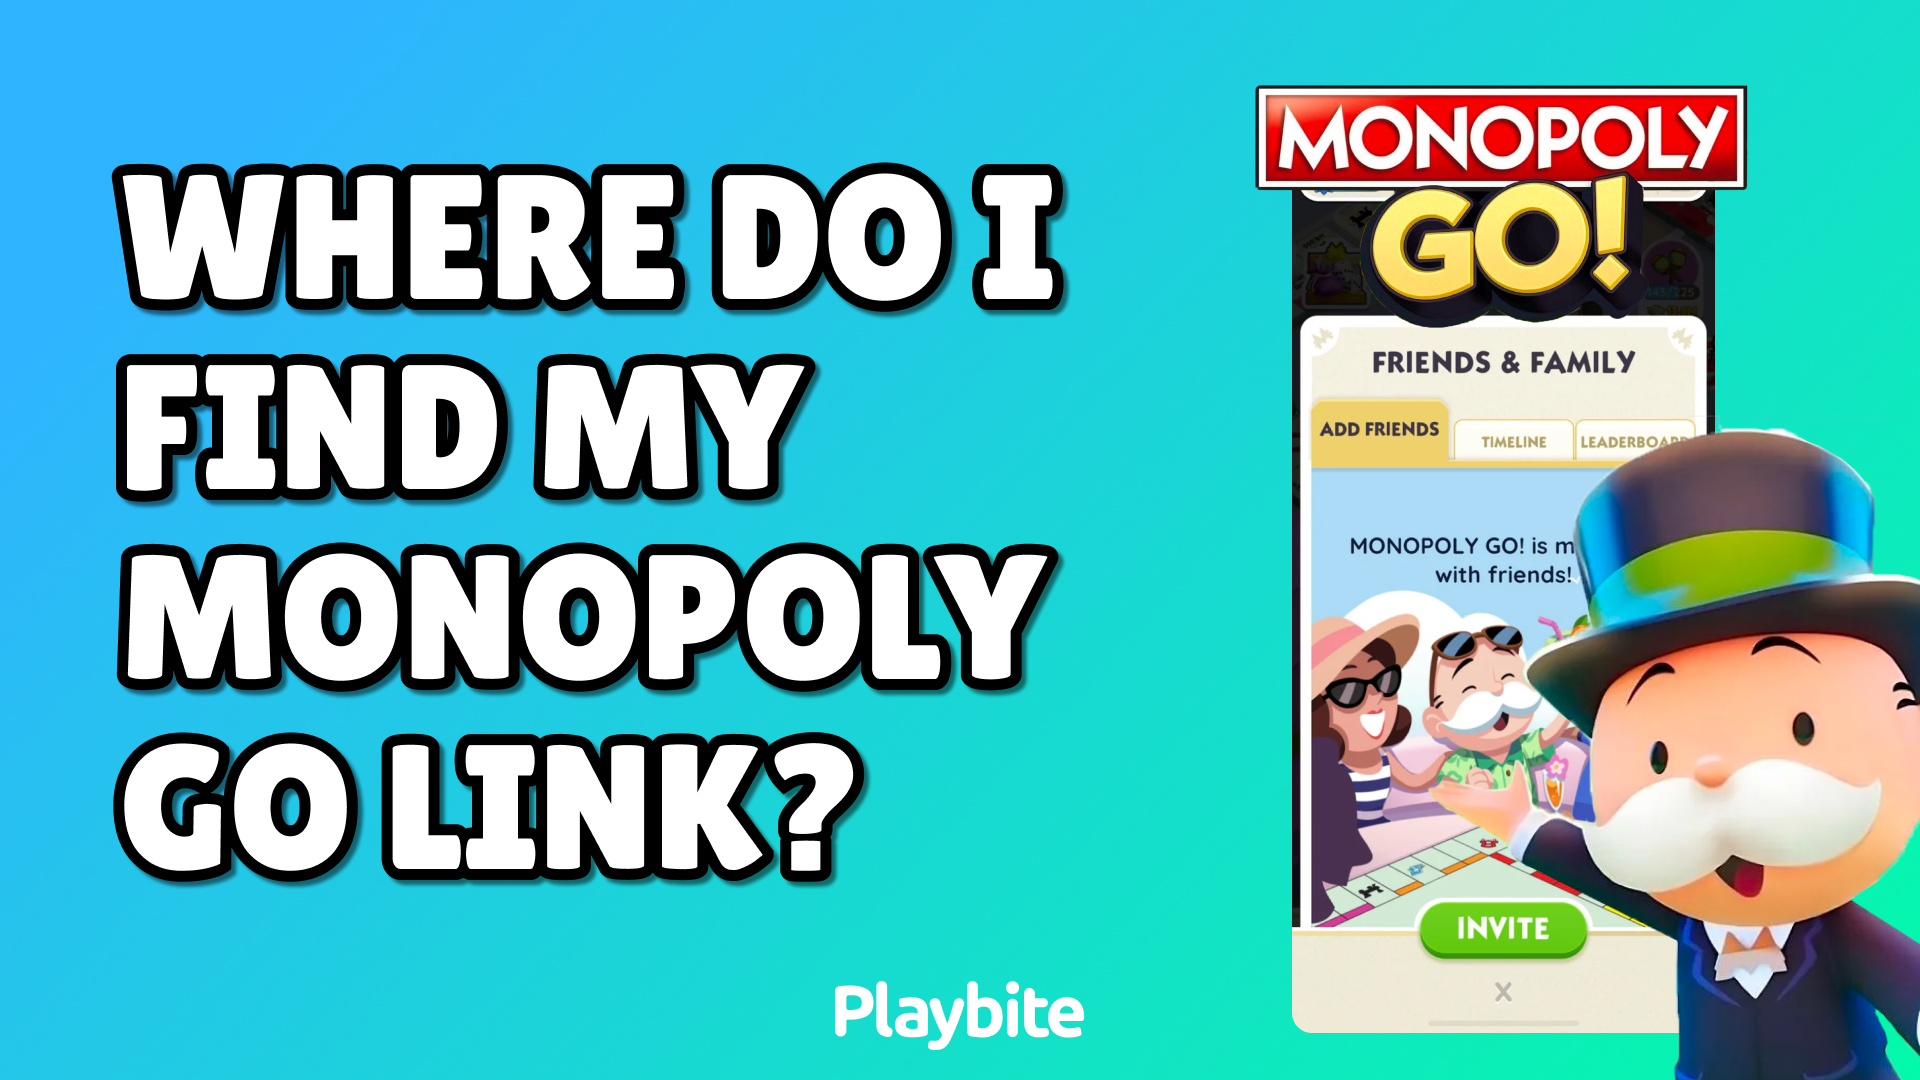 Where Do I Find My Monopoly Go Link?